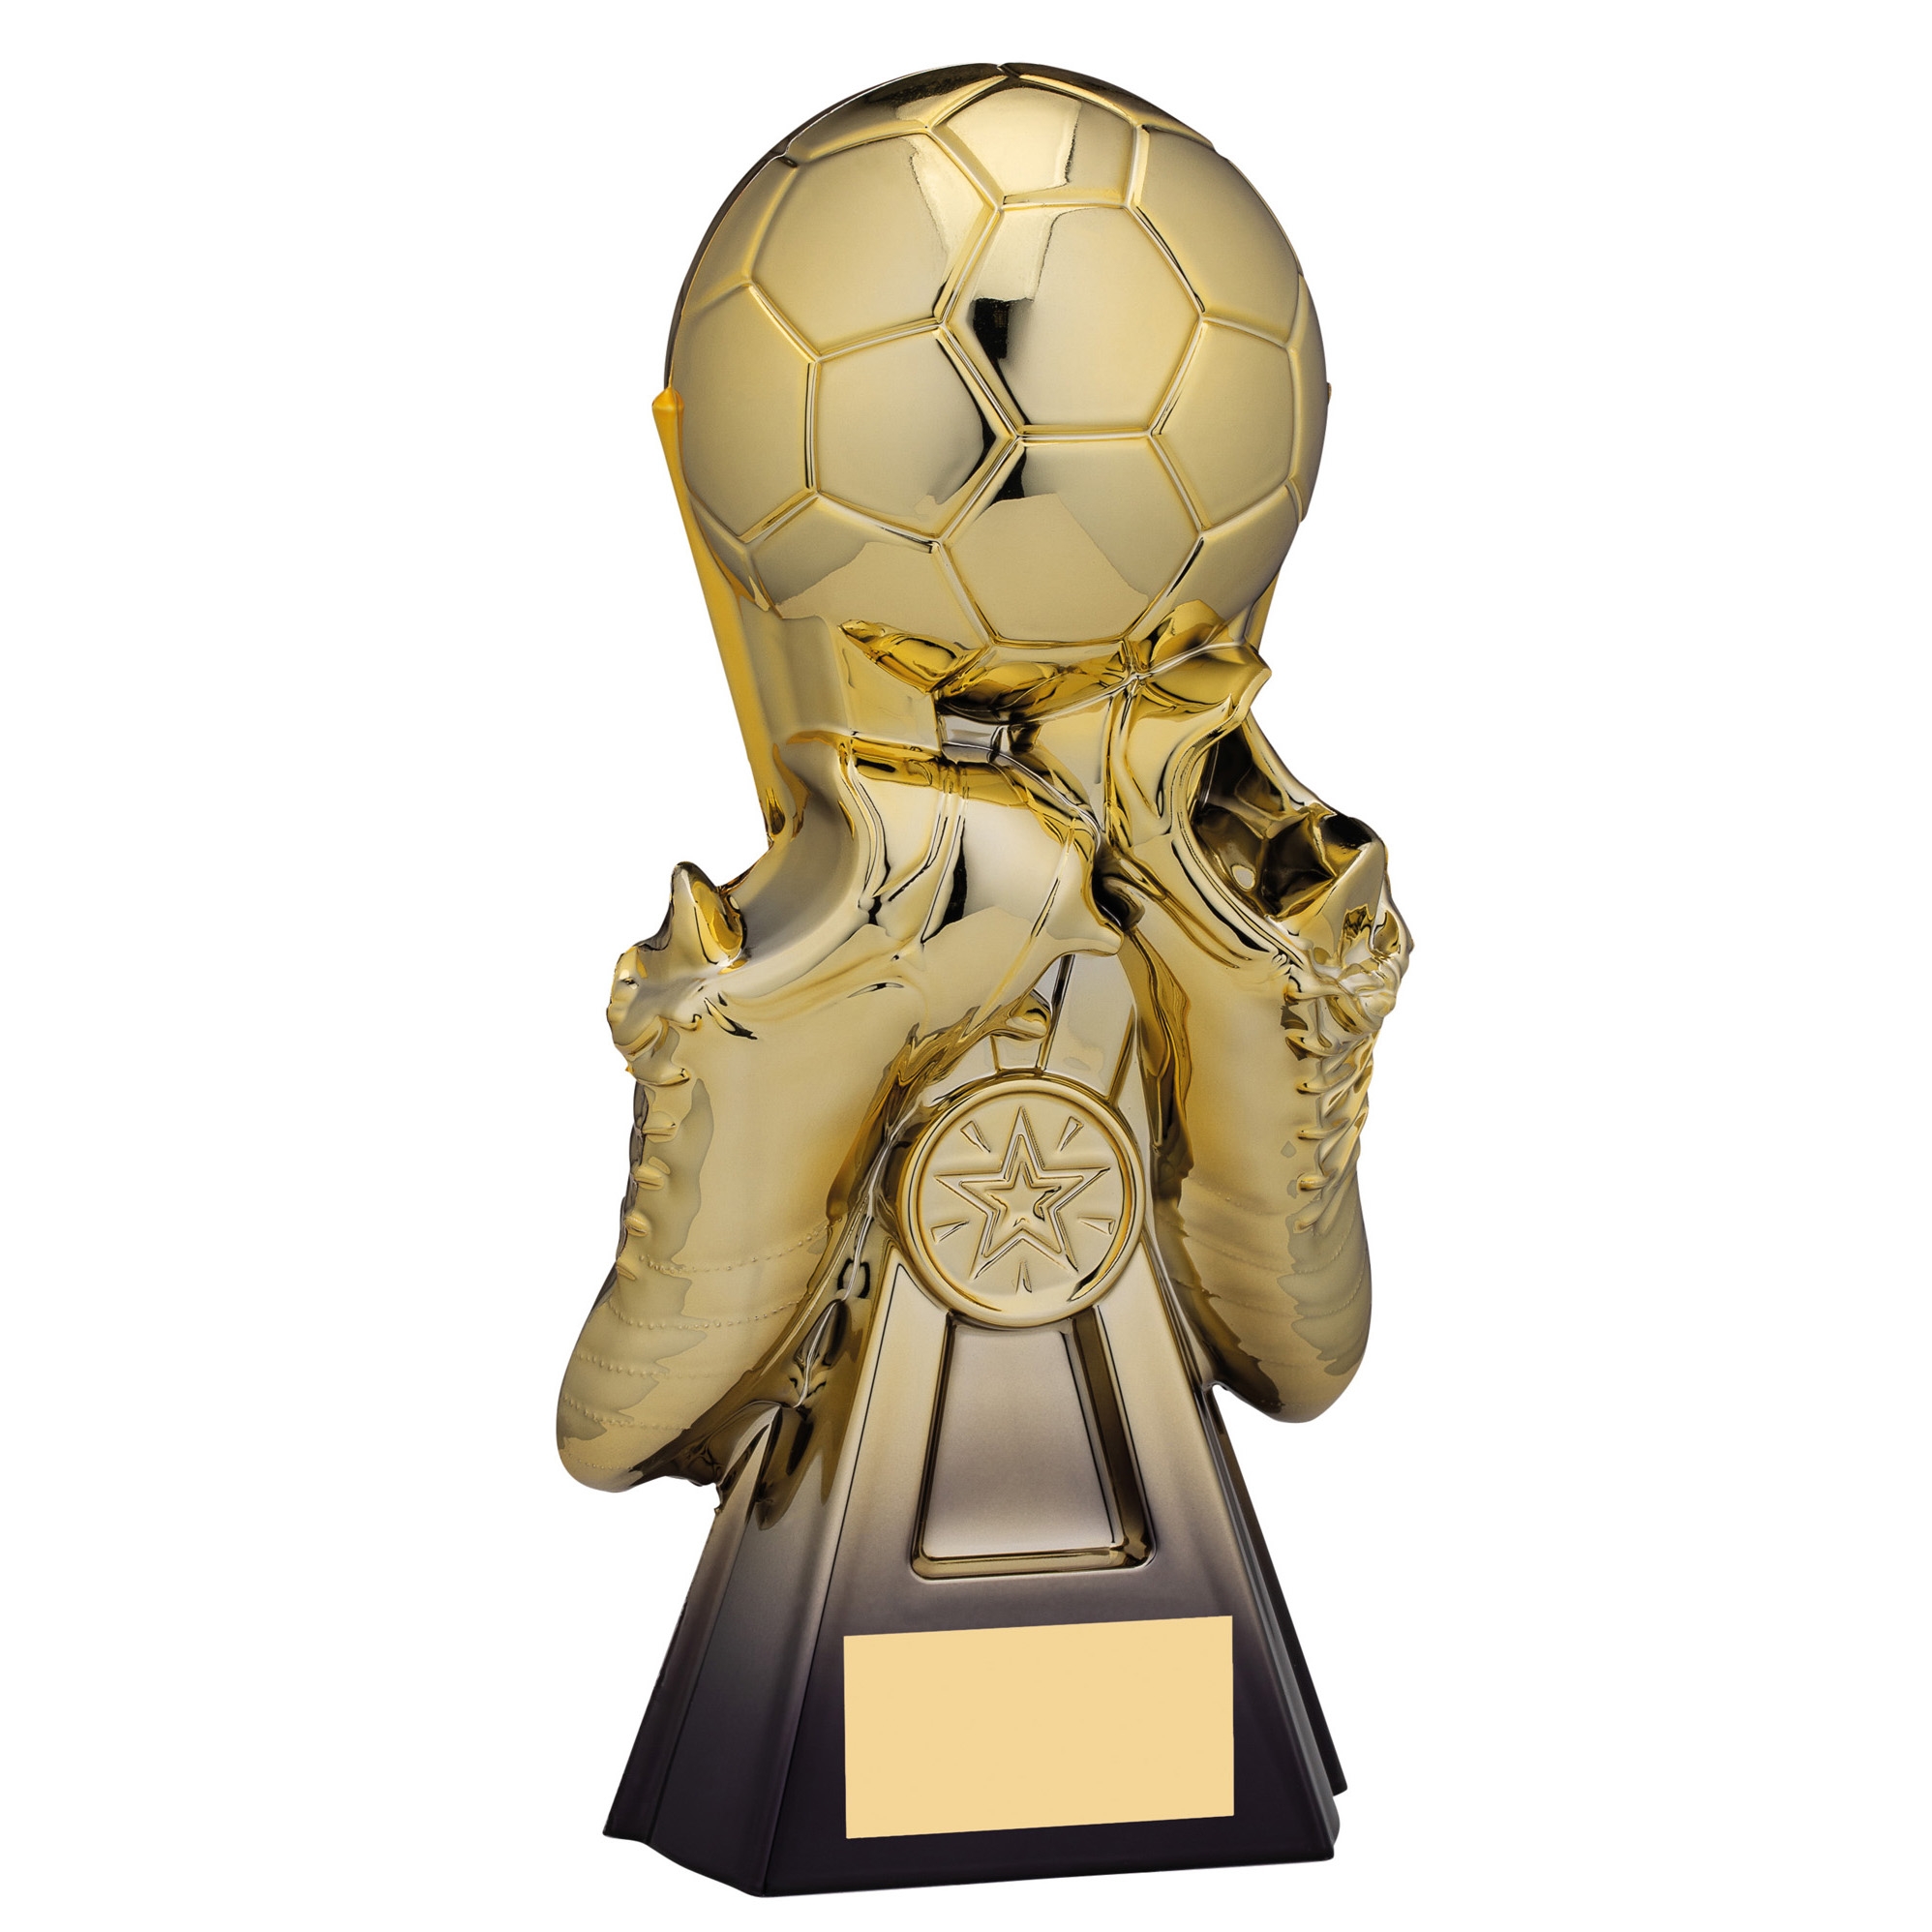 6.25" GRAVITY BOOT AND BALL FOOTBALL TROPHY